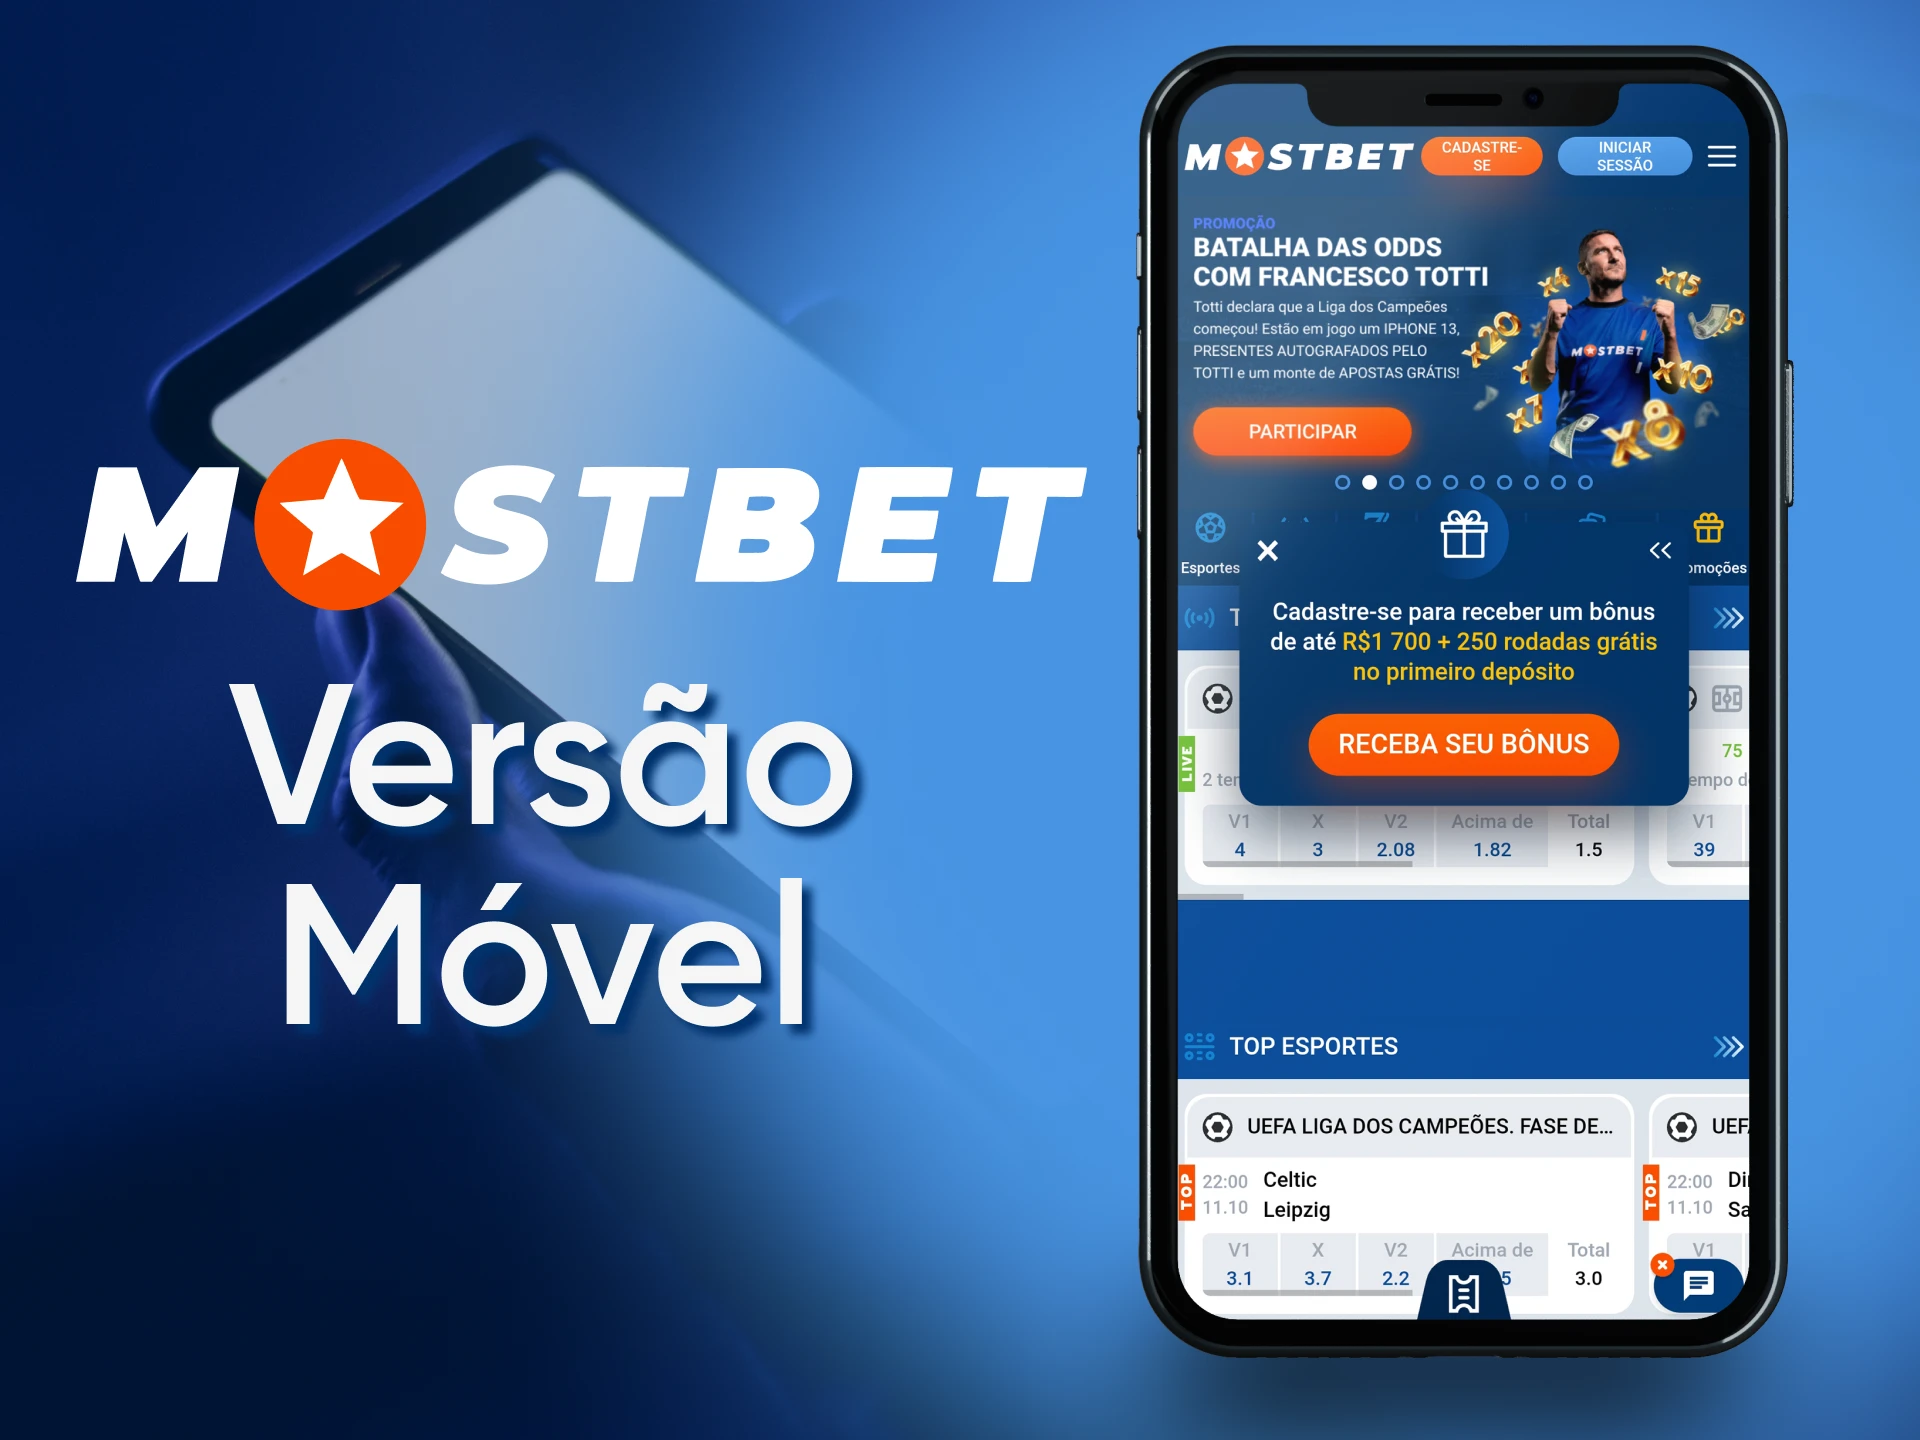 Use the Mostbet mobile site from your device.